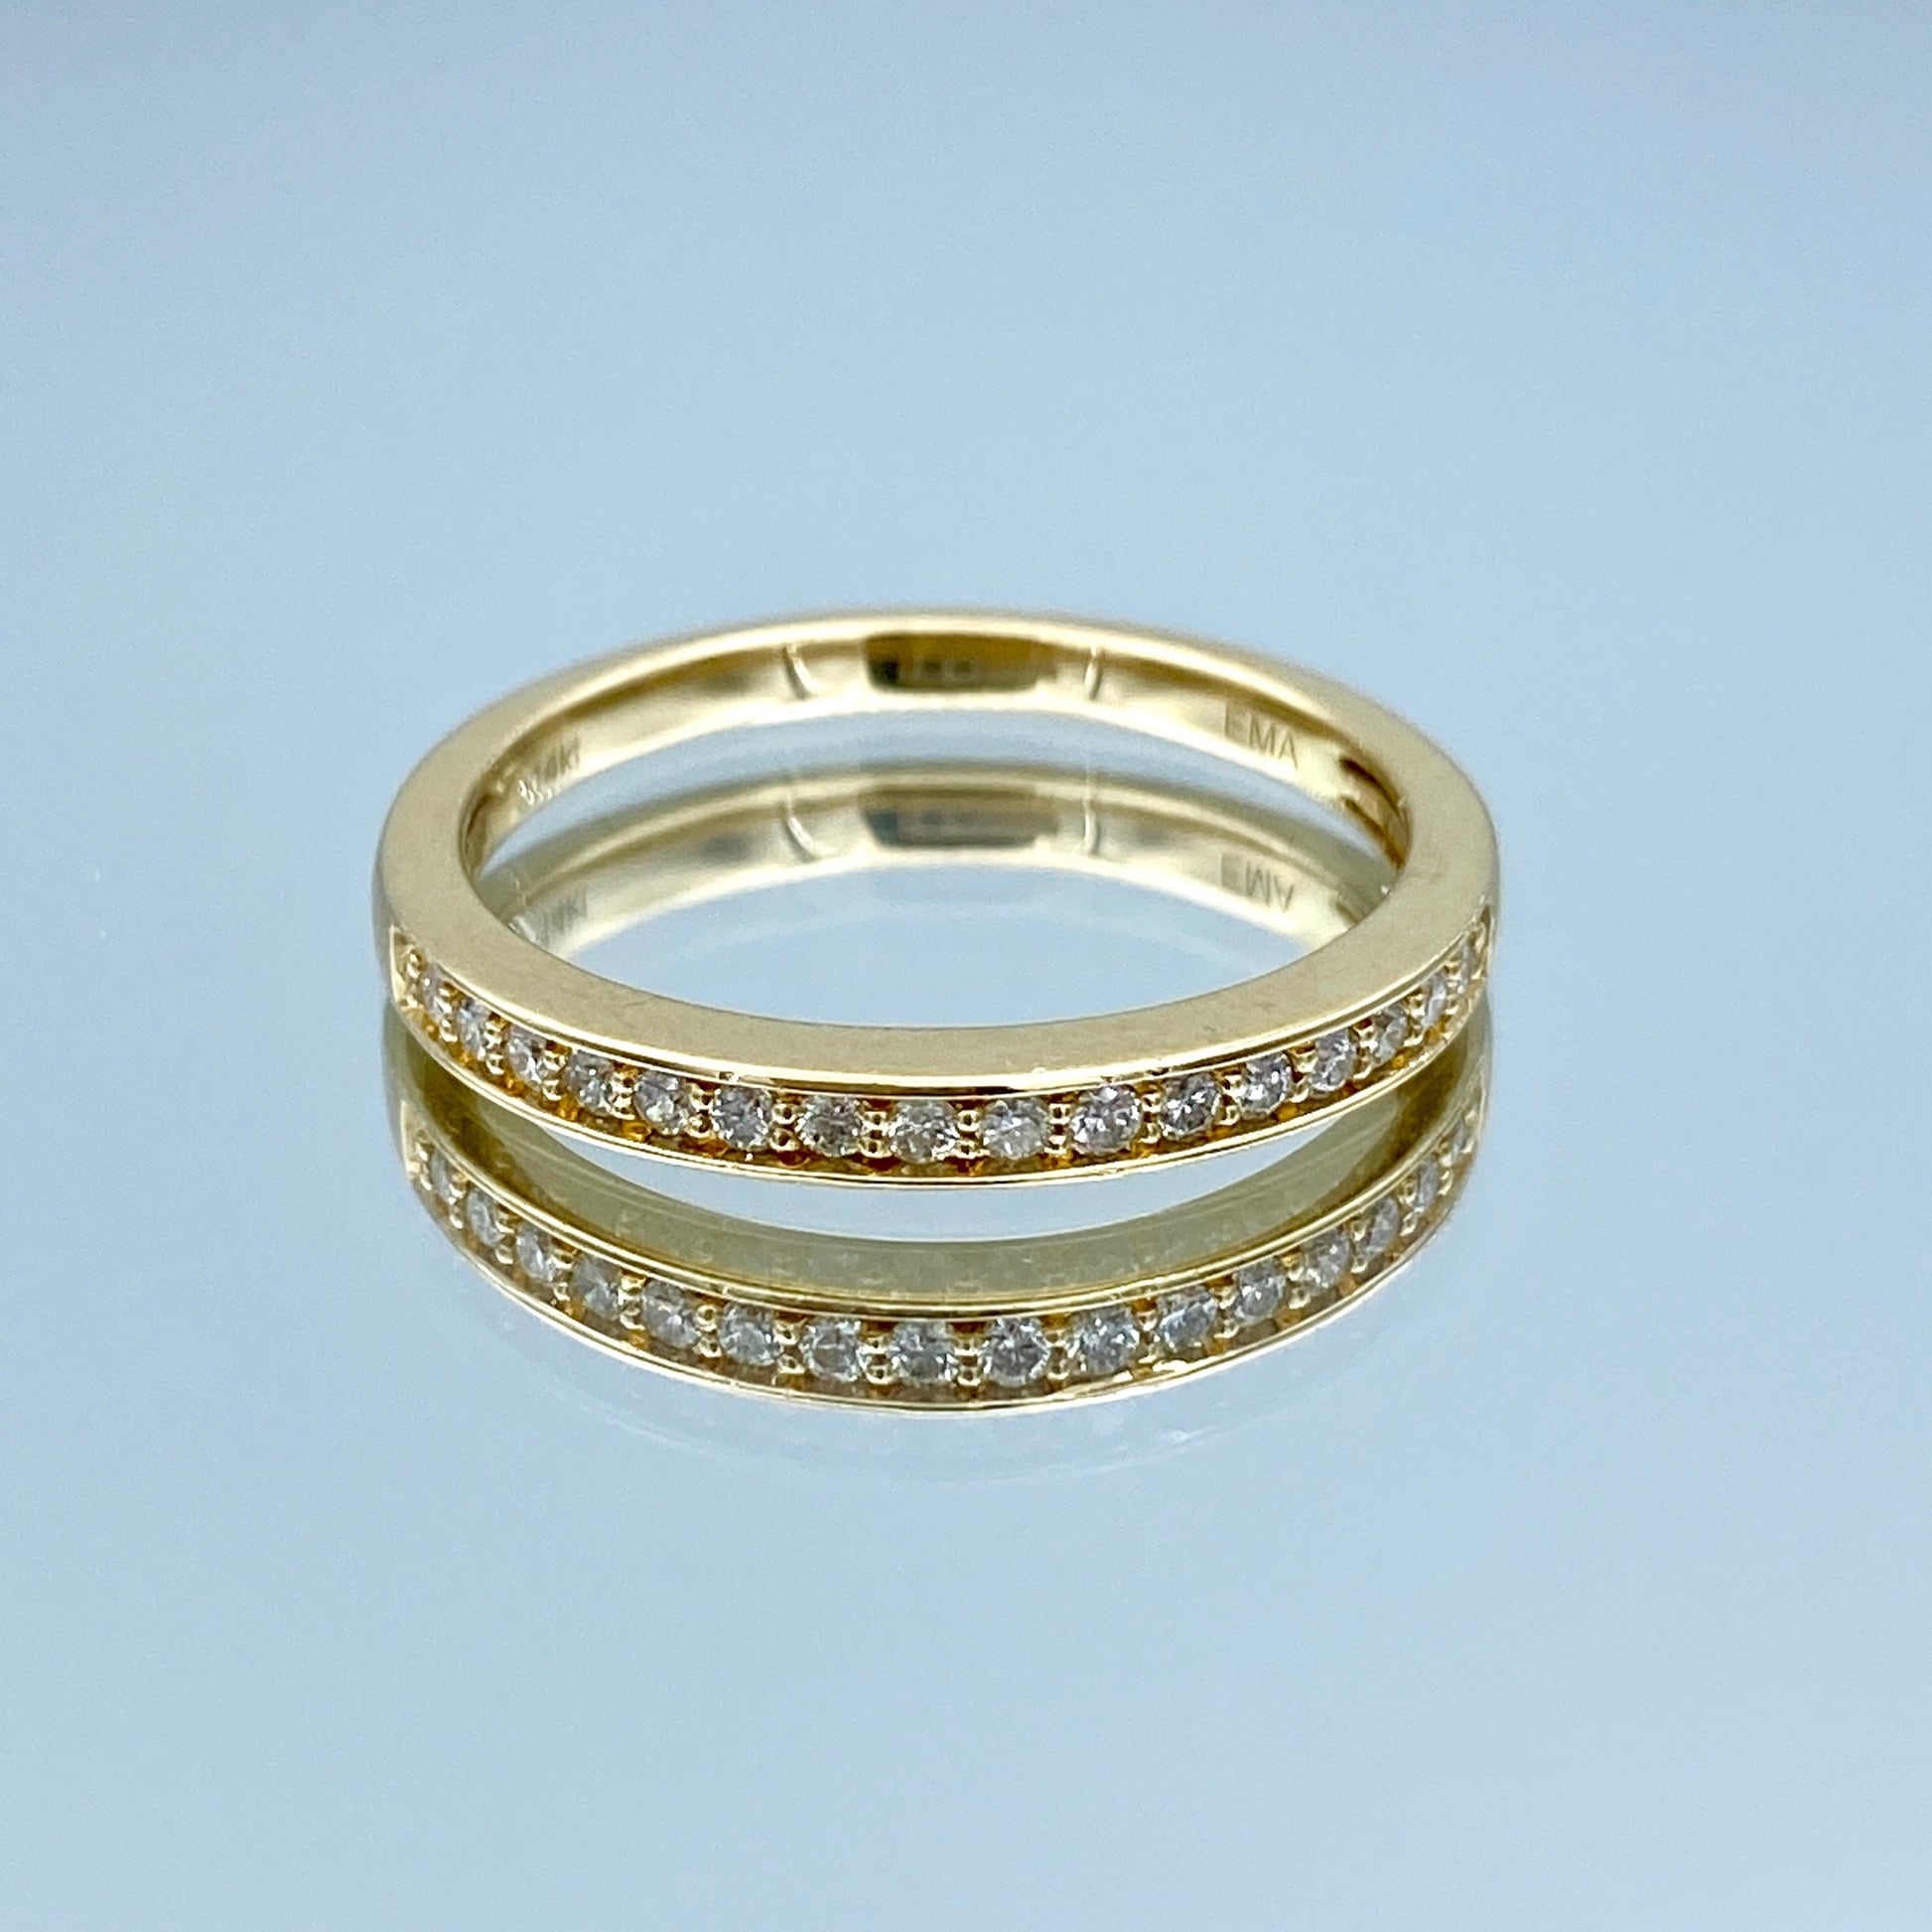 Round-Cut Diamond Halfway Ring in 14K Yellow Gold - L and L Jewelry